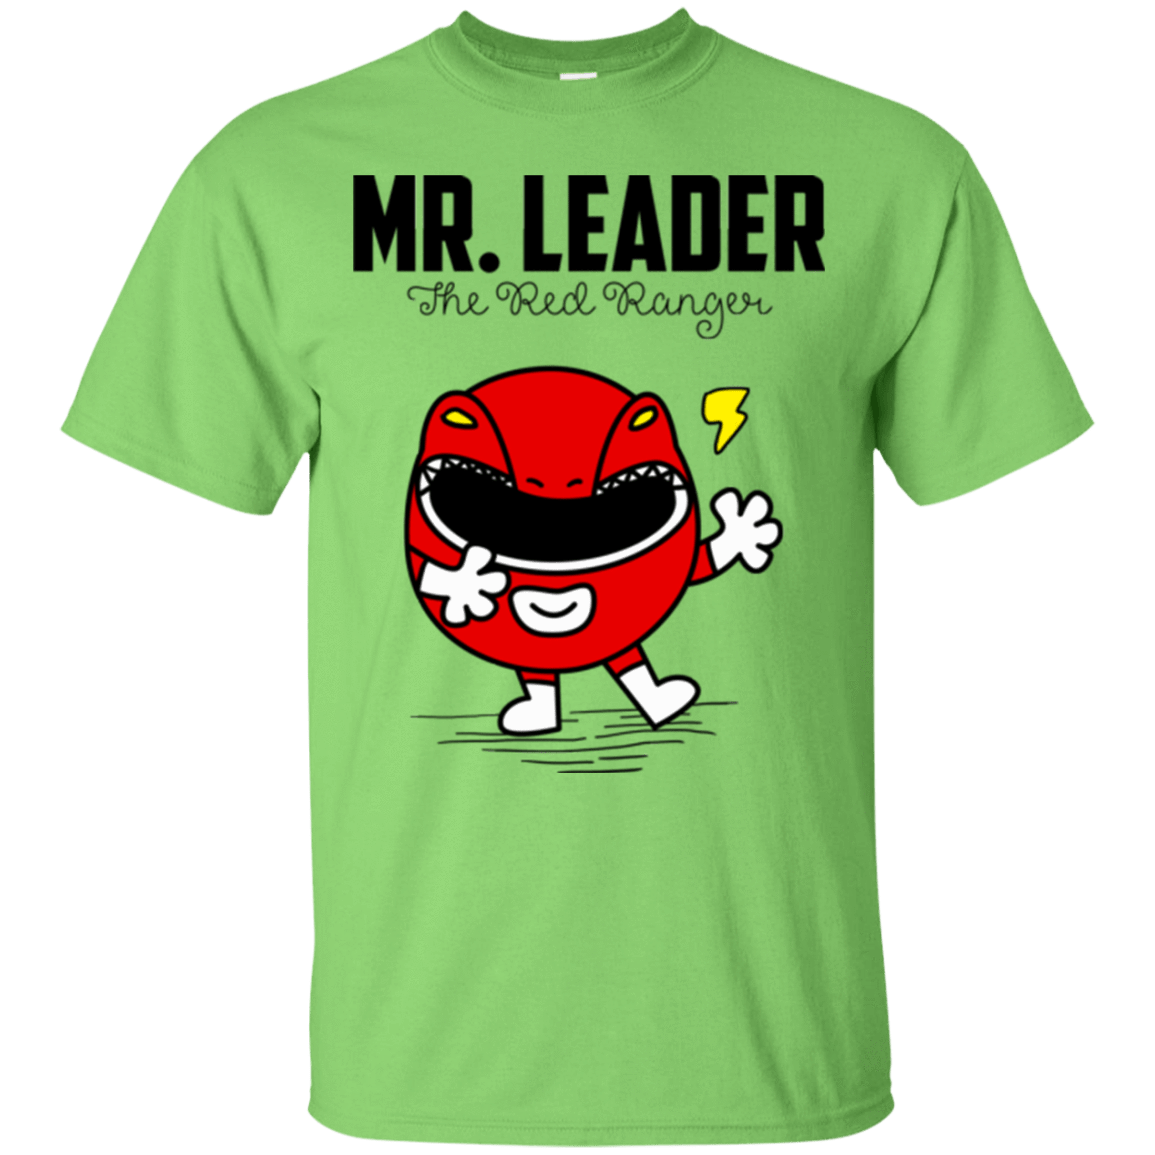 T-Shirts Lime / Small Mr Leader T-Shirt